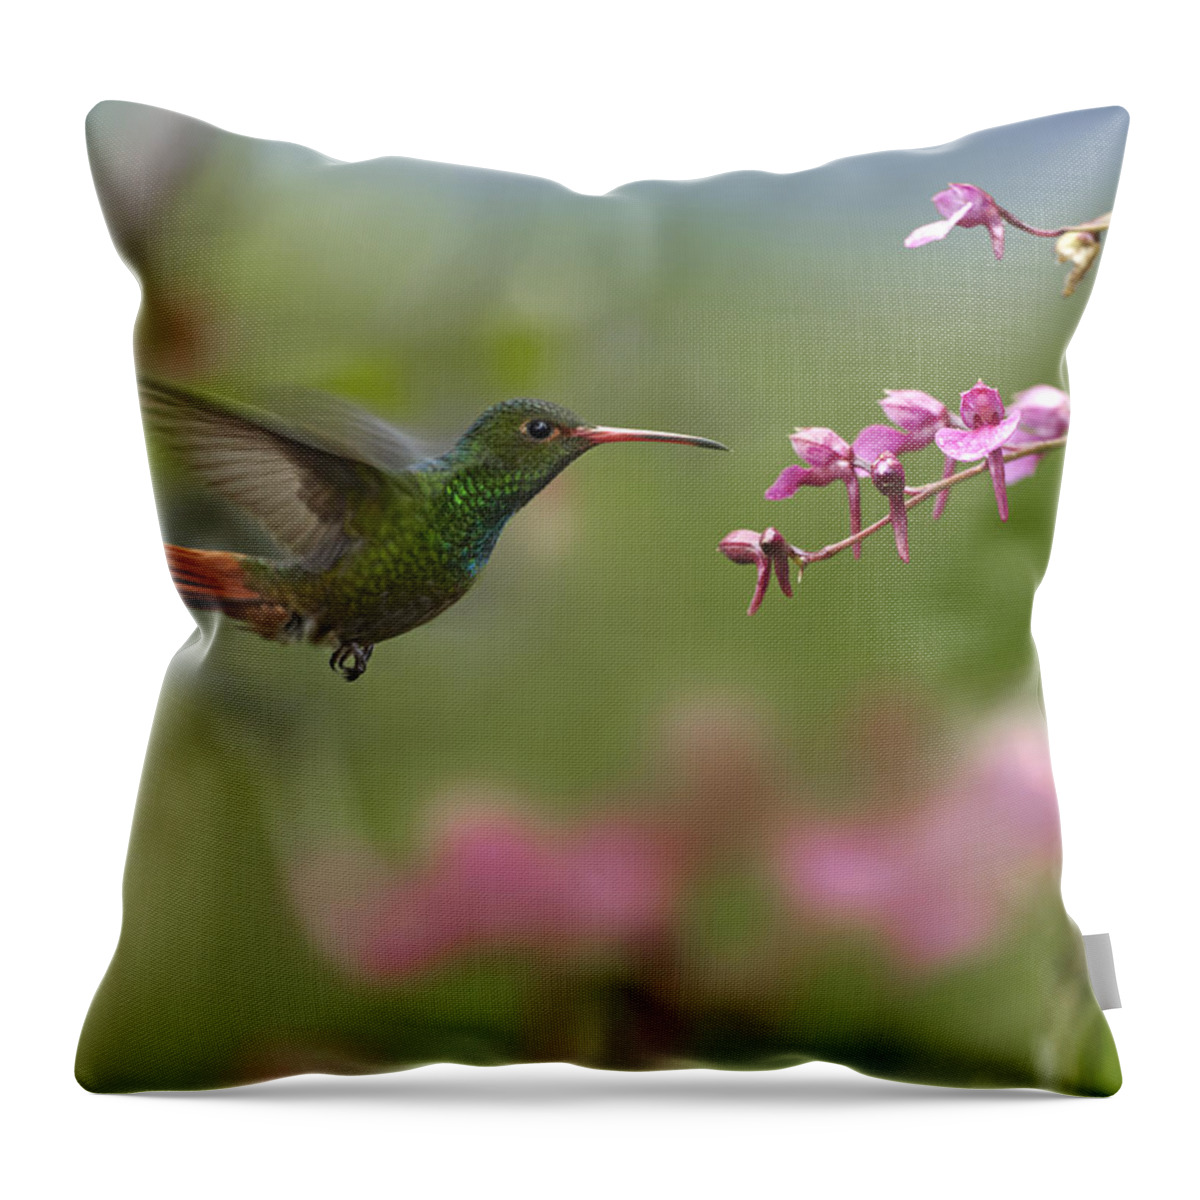 00442639 Throw Pillow featuring the photograph Rufous Tailed Hummingbird Hovering by Tim Fitzharris